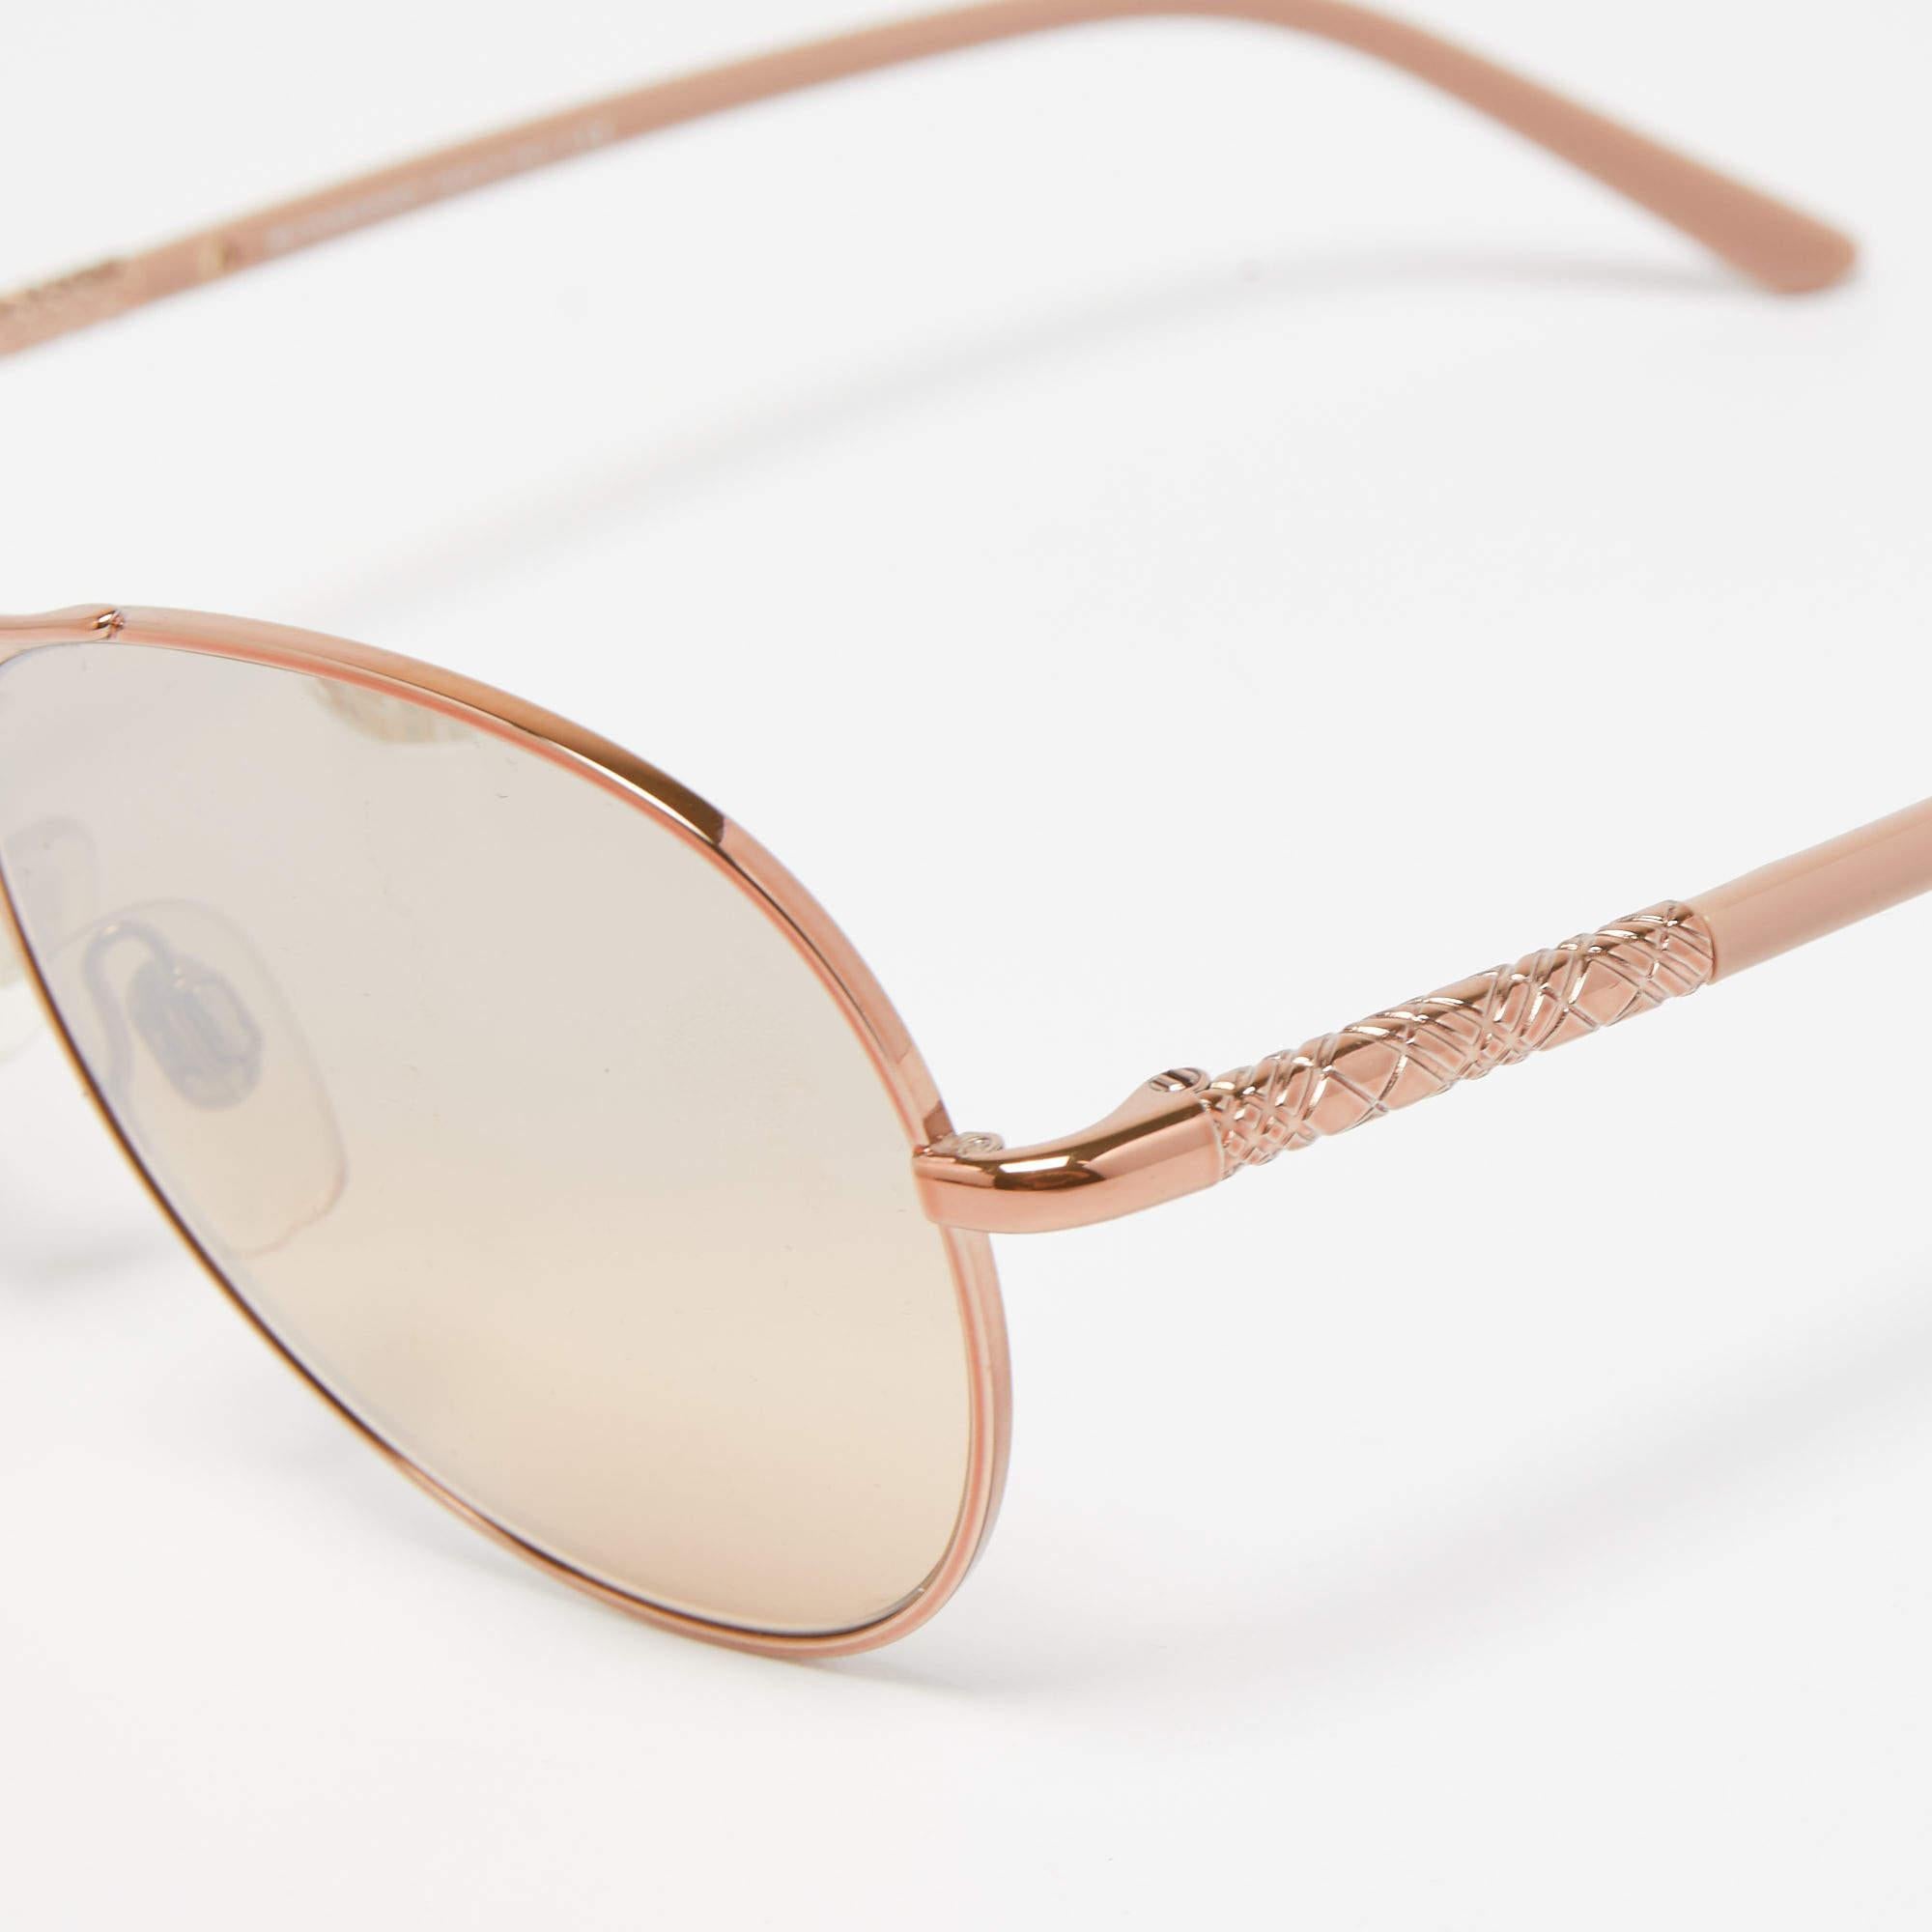 A statement pair of sunglasses from Burberry will surely make a prized buy. Featuring a trendy frame and lenses meant to protect your eyes, the sunglasses are ideal for all-day wear.


Gender

Women

Includes

Original Pouch, Original Dust Cloth